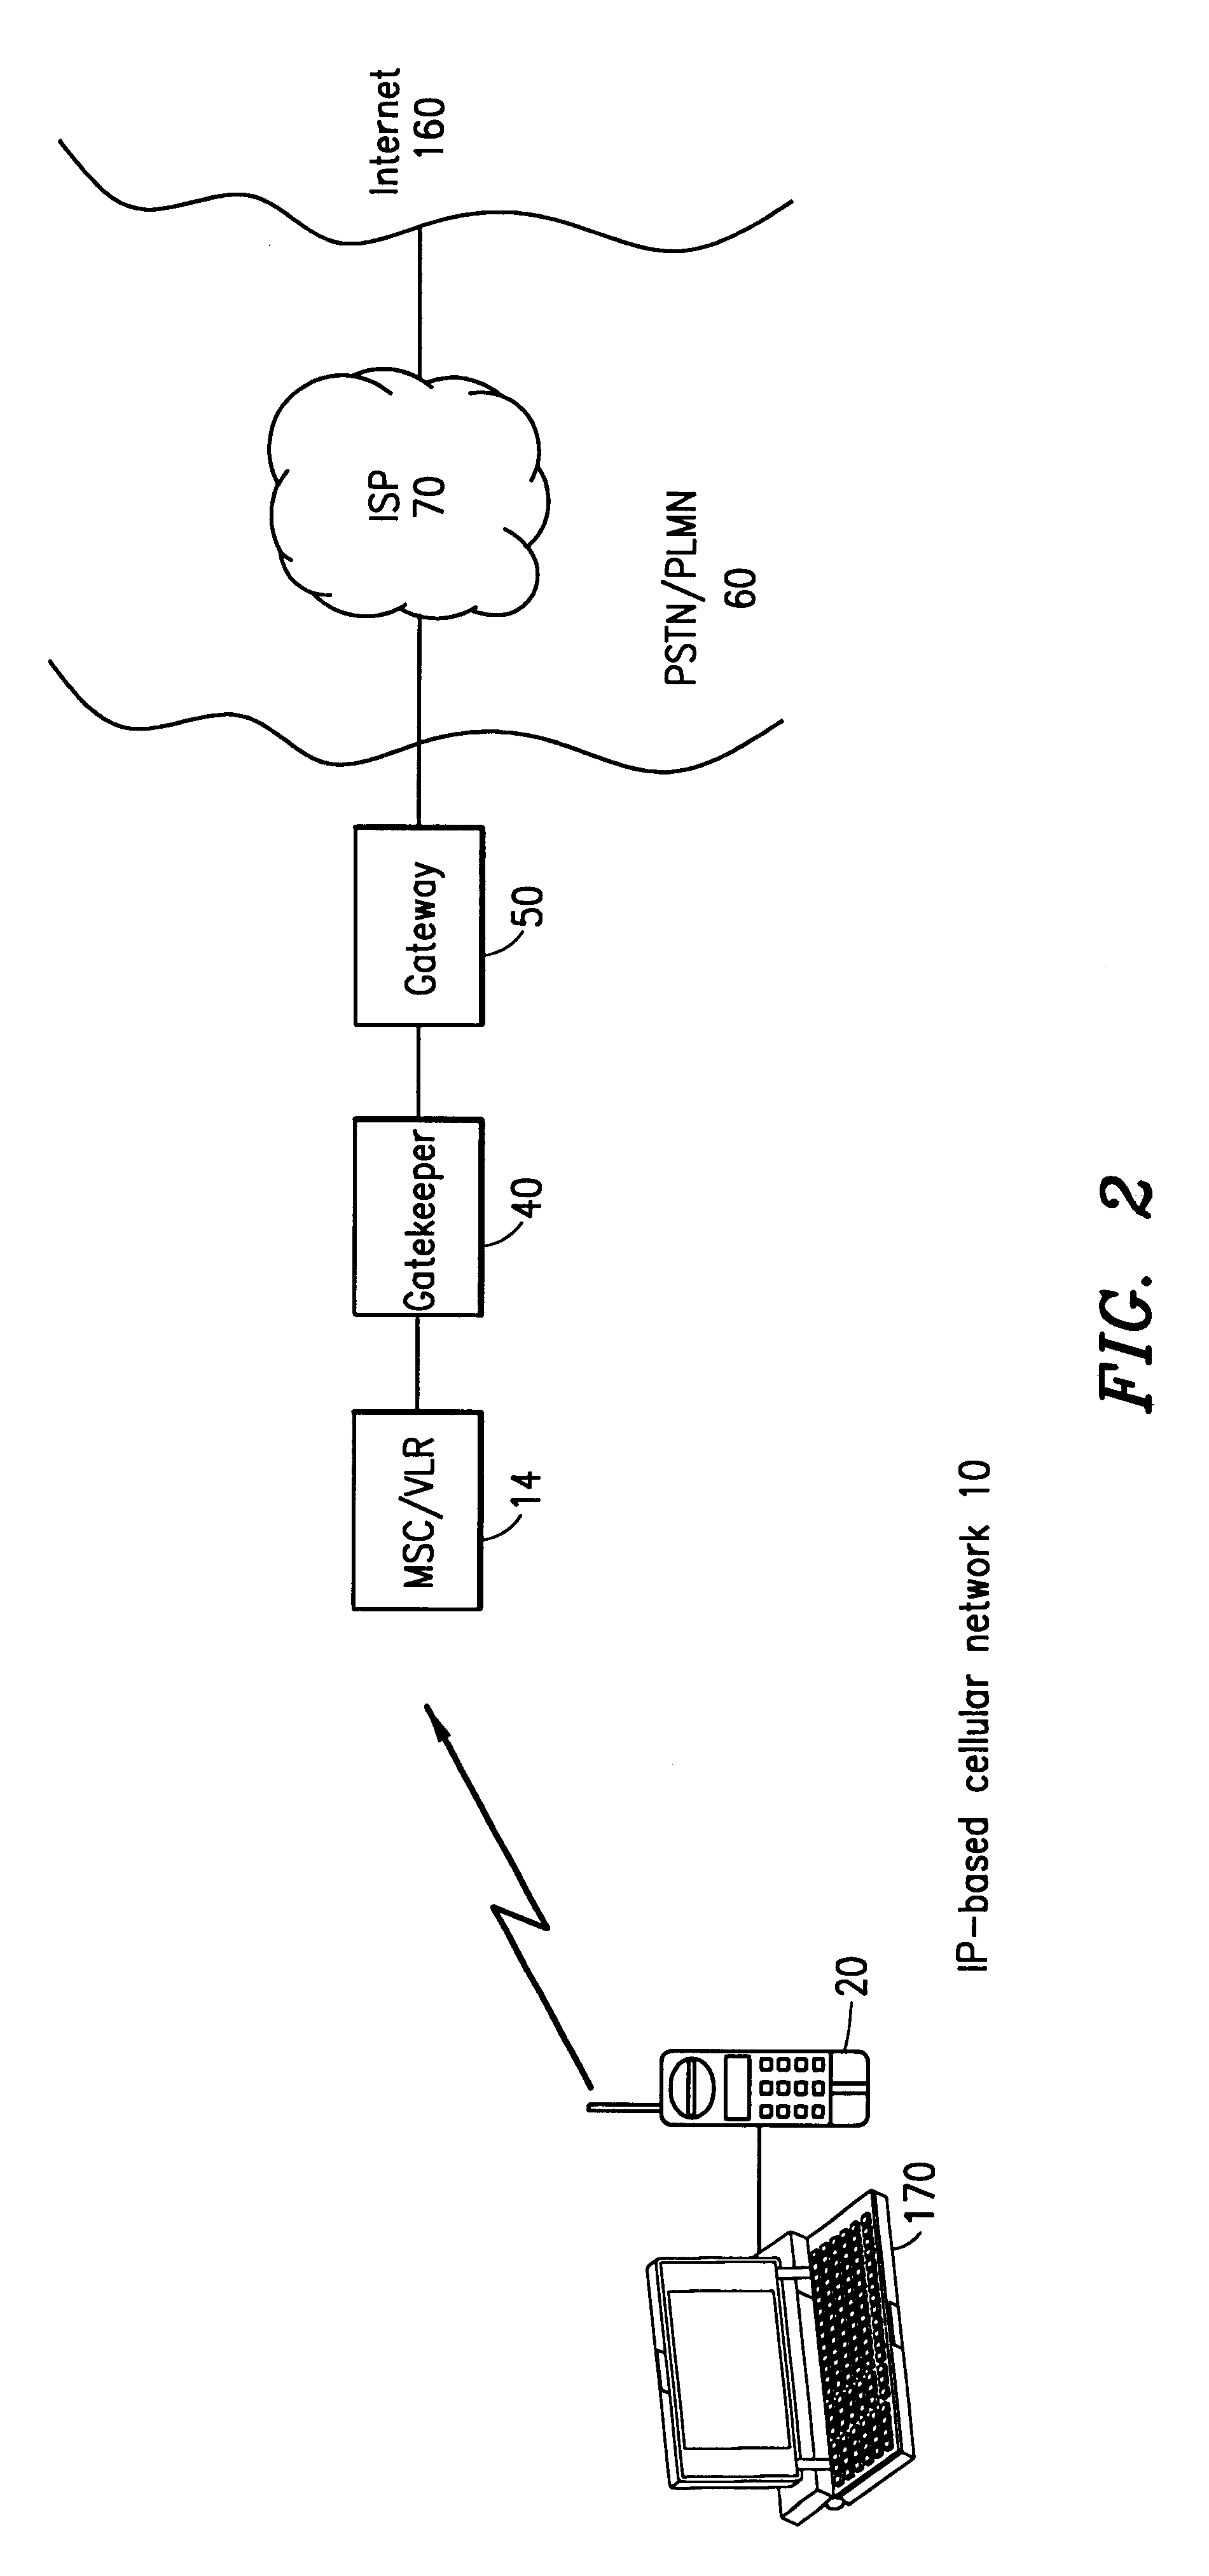 System and method for accessing the internet in an internet protocol-based cellular network